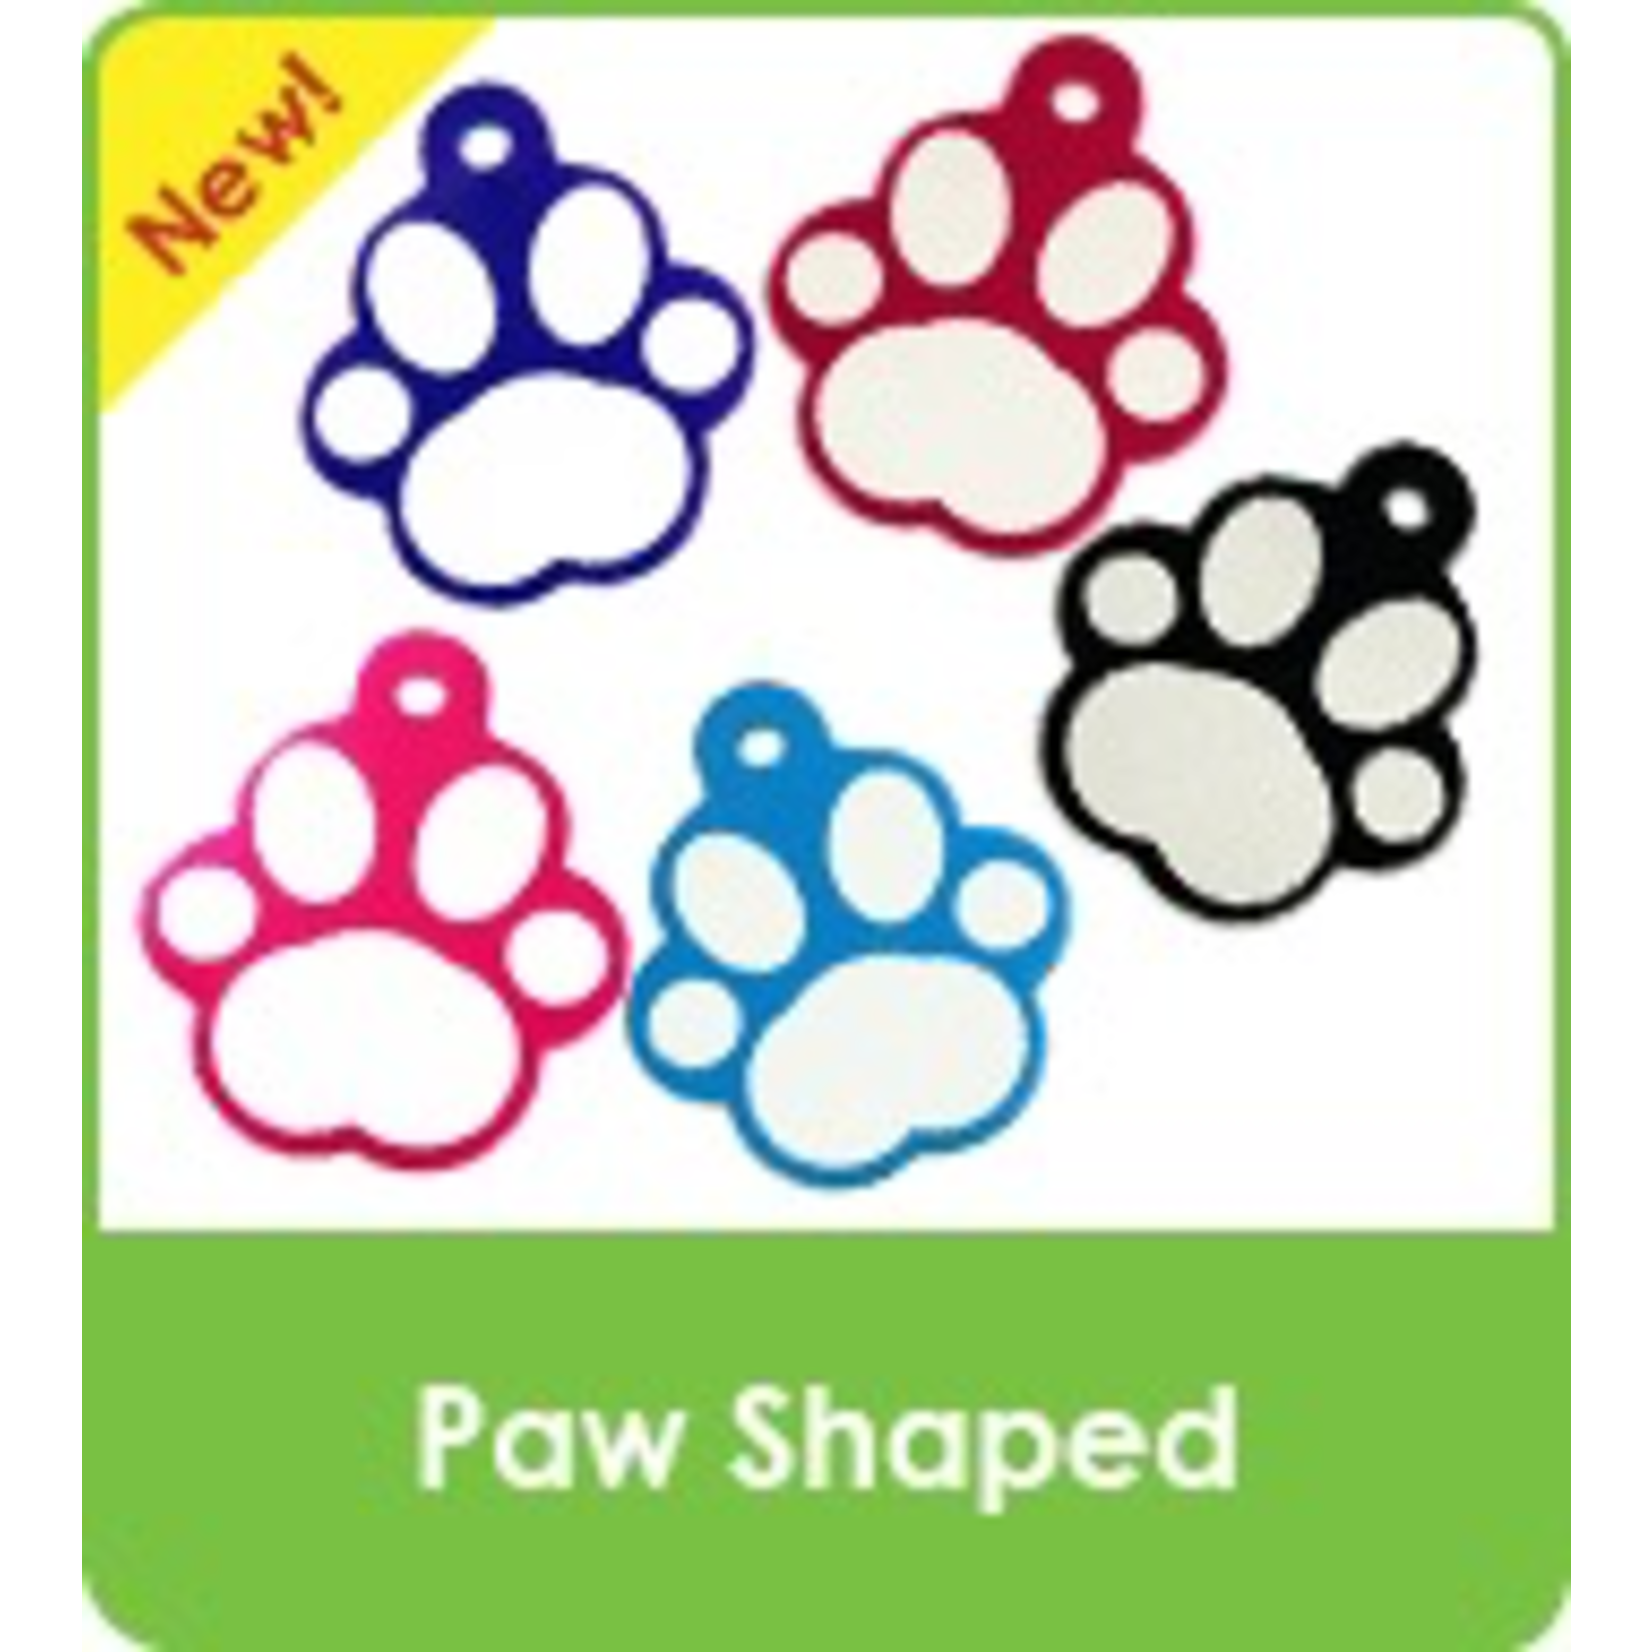 Designer & Paw Shaped (one side engraving only)